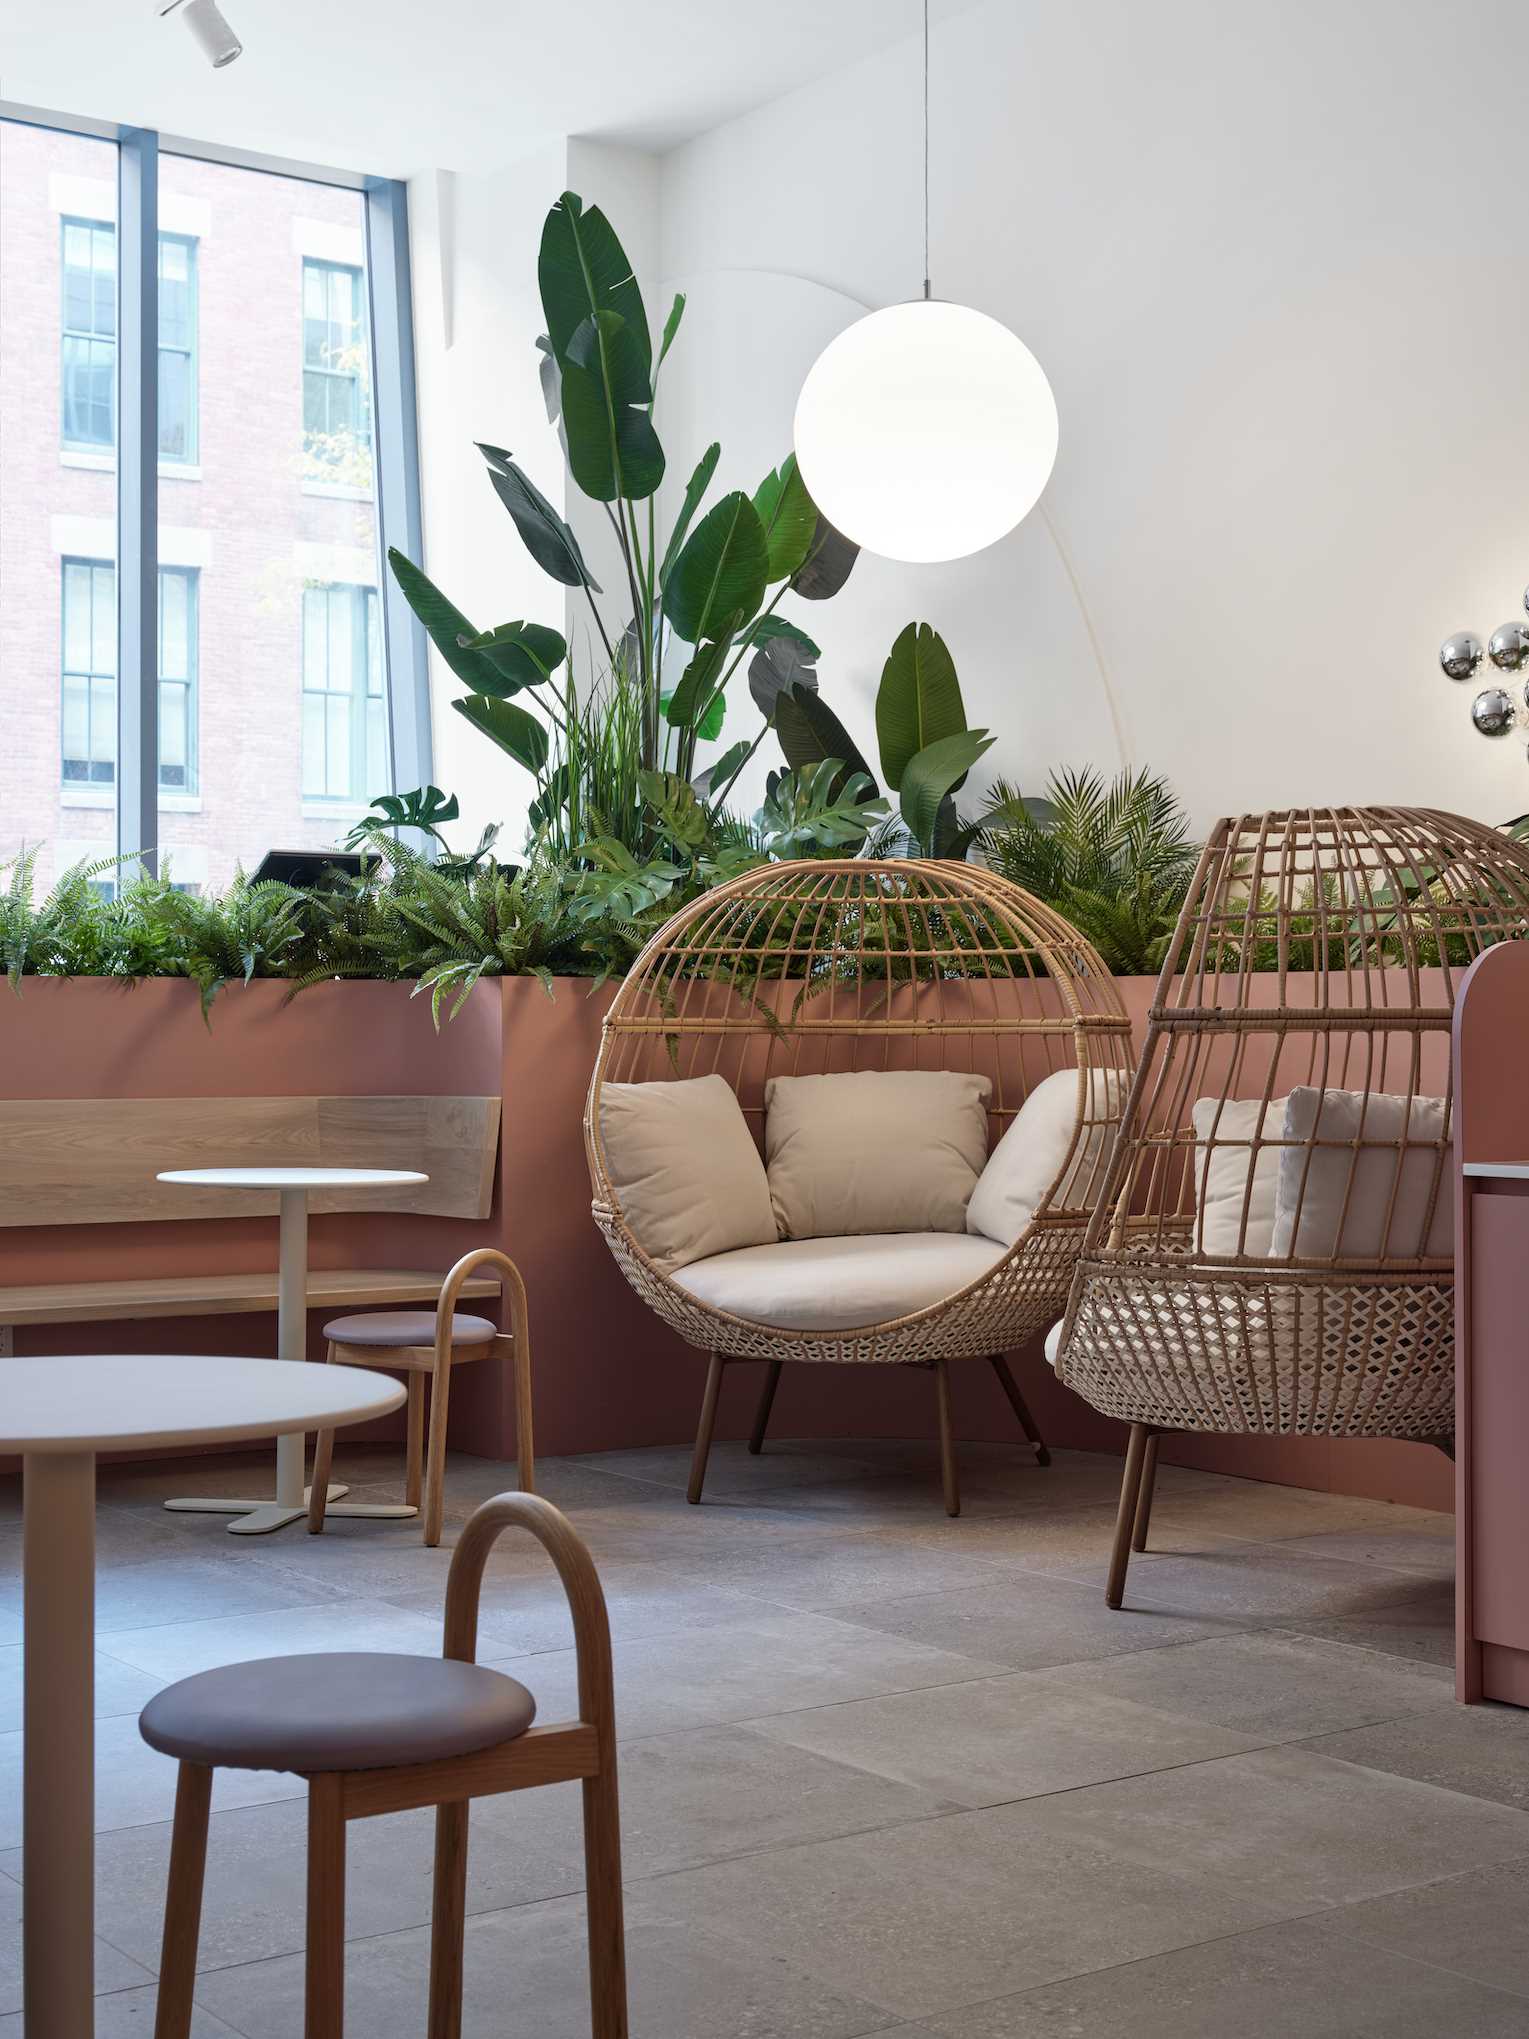 A modern cafe with plants, cozy seating, and soft colors.